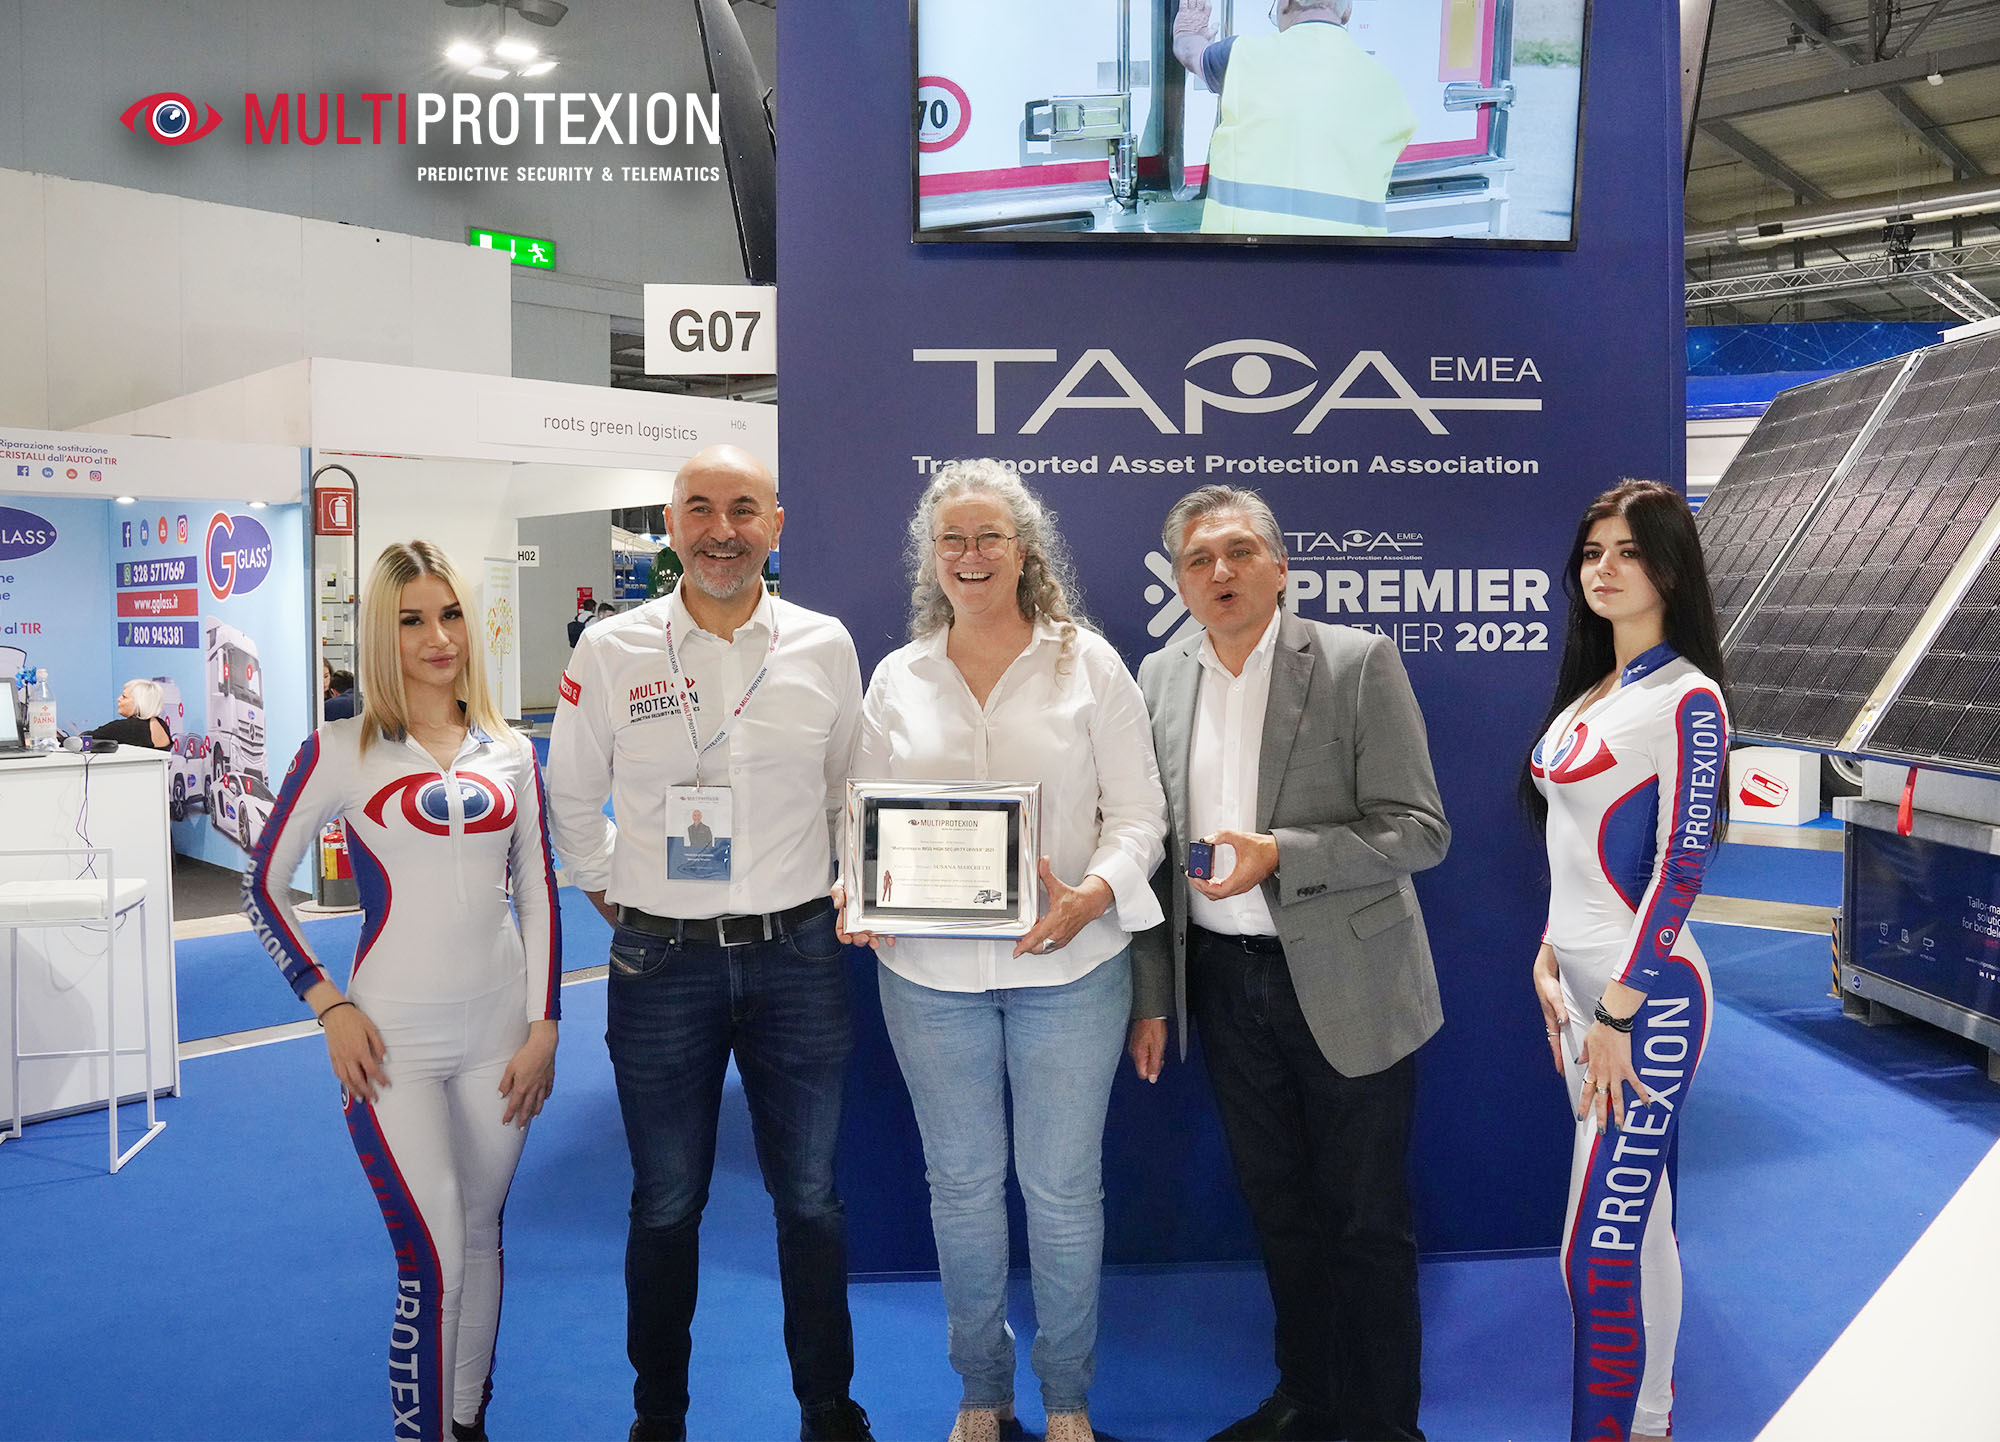 SUSANA MARCHETTI IS “MULTIPROTEXION LADY HIGH SECURITY DRIVER”